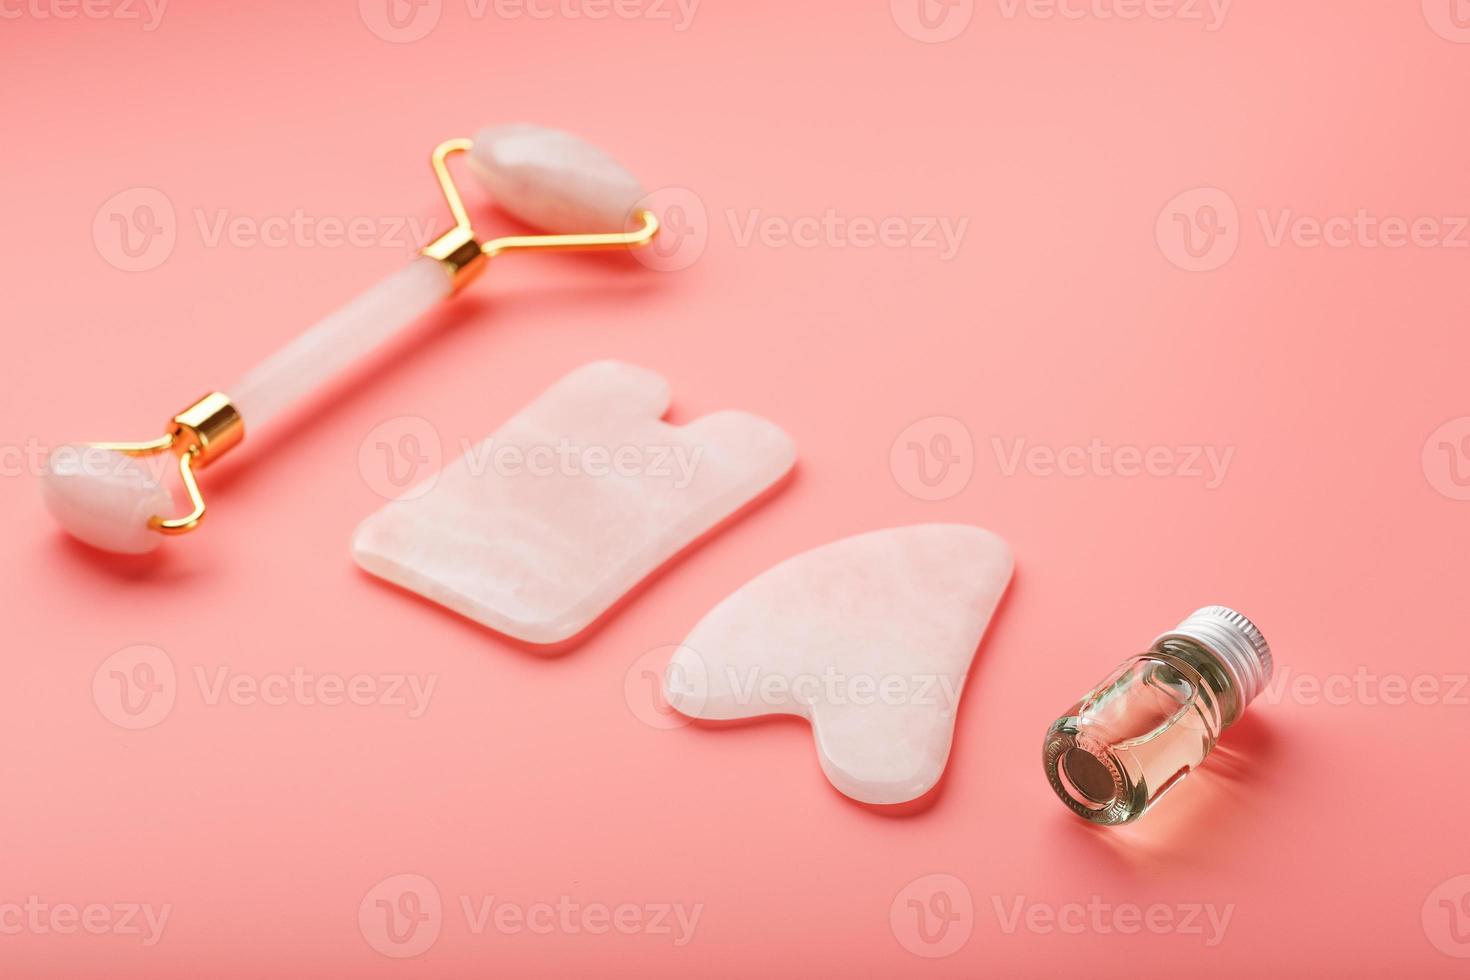 A set of tools for face Massage technique Gua Sha made of natural rose quartz on a pink background. Roller, jade stone and oil in a glass jar for face and body care. photo